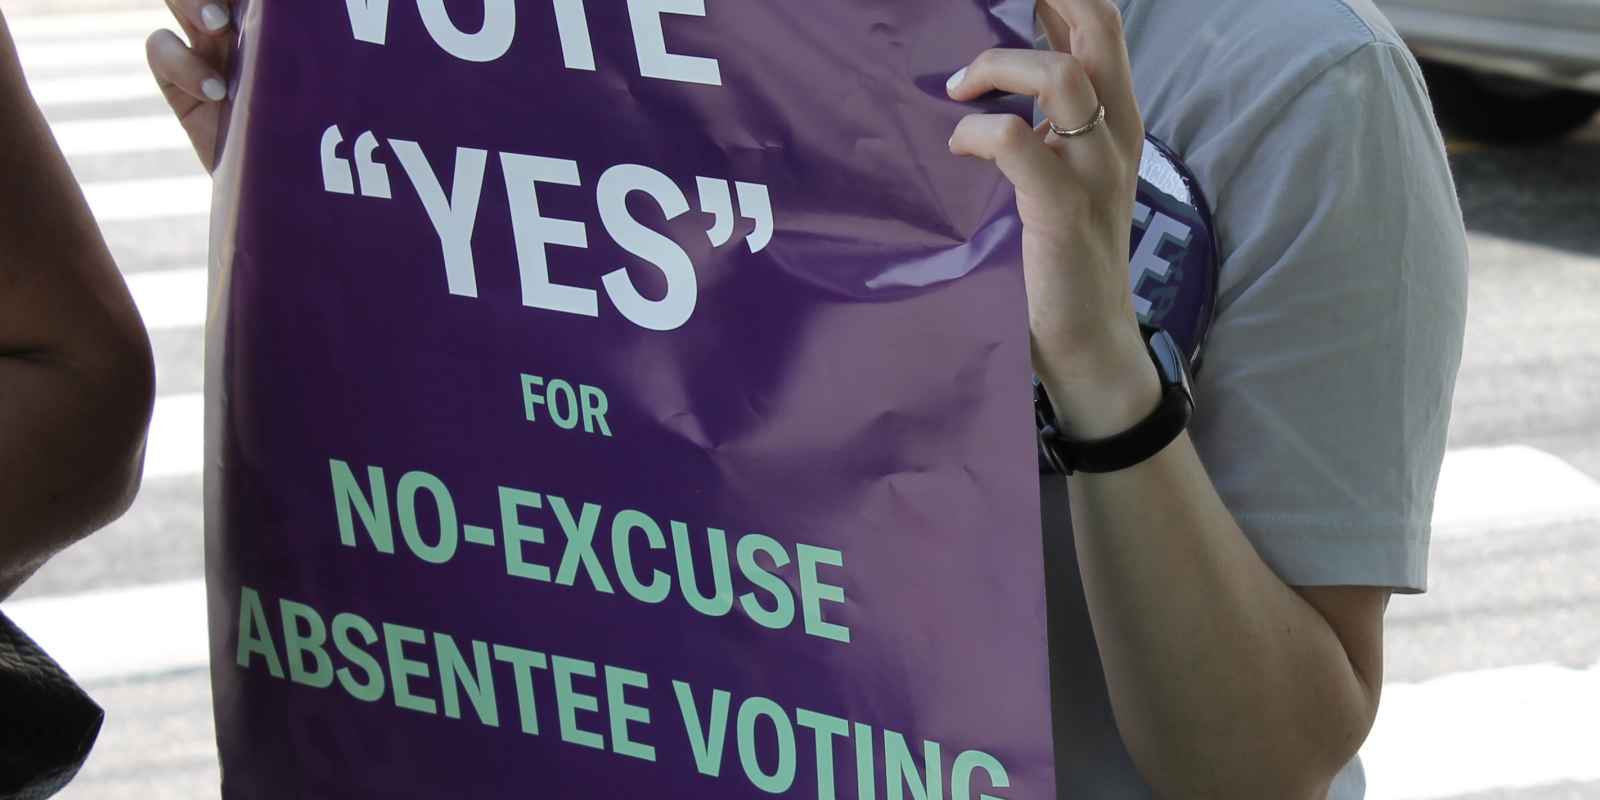 A woman, who is mostly out of frame, is holding a purple sign that says "VOTE "YES" FOR NO-EXCUSE ABSENTEE VOTING" in white and teal text.